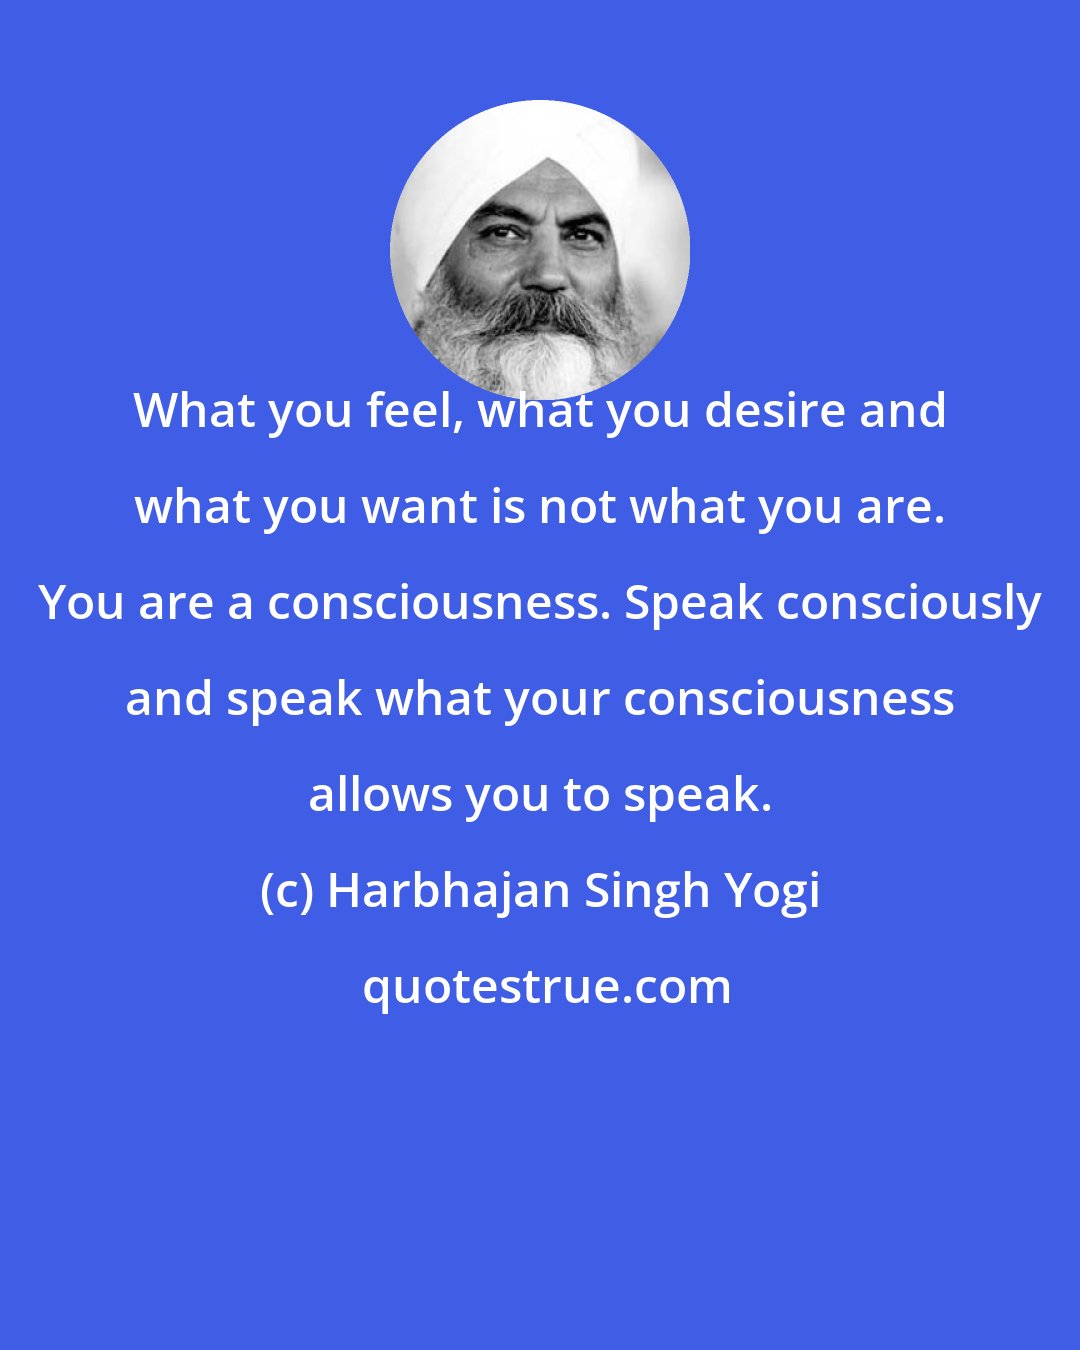 Harbhajan Singh Yogi: What you feel, what you desire and what you want is not what you are. You are a consciousness. Speak consciously and speak what your consciousness allows you to speak.